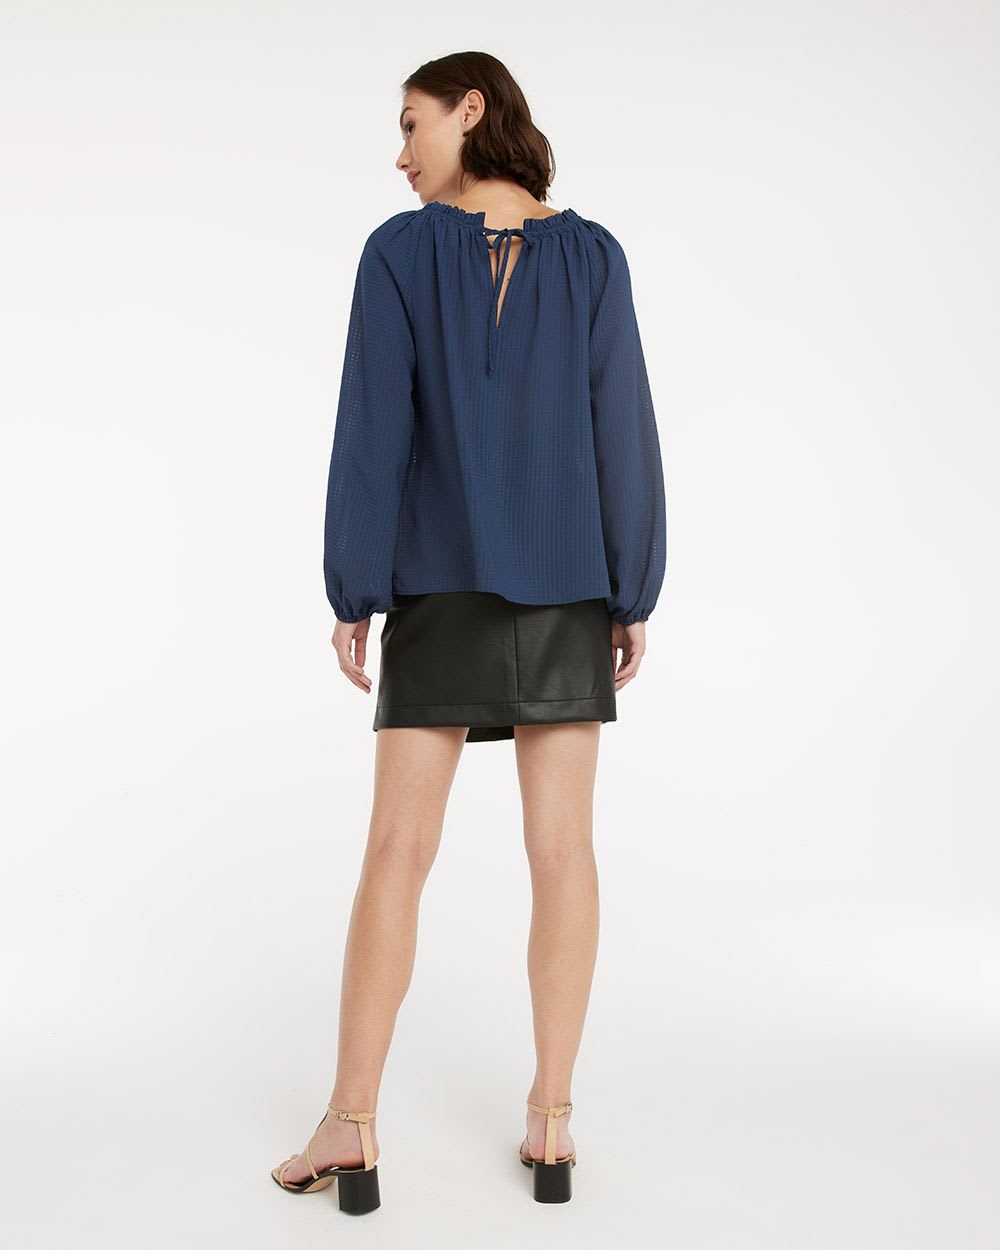 Loose Blouse with 3/4 Puffy Sleeves